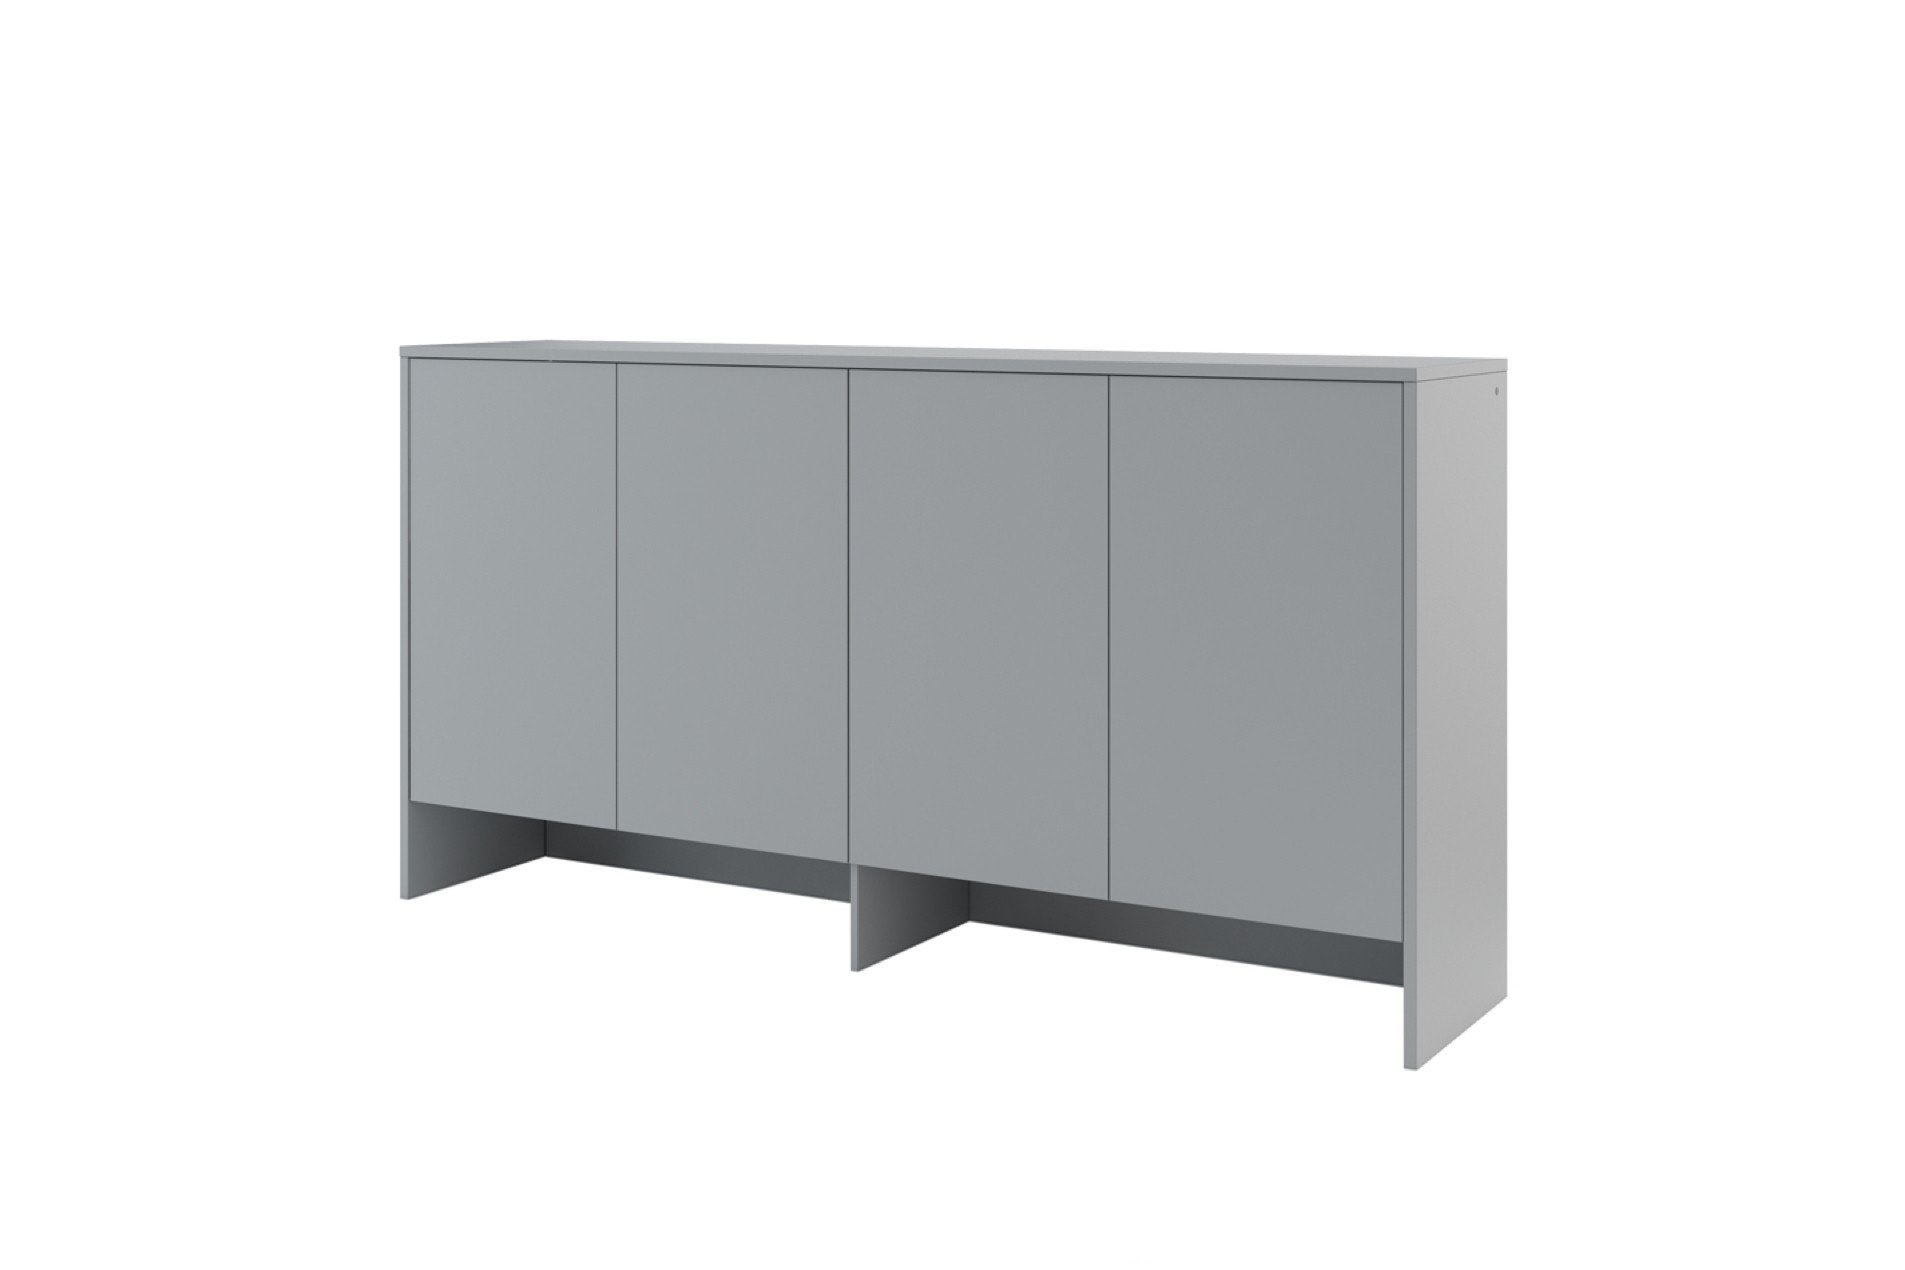 BC-11 Over Bed Unit for Horizontal Wall Bed Concept 90cm Grey Matt Wall Bed with Storage Unit 